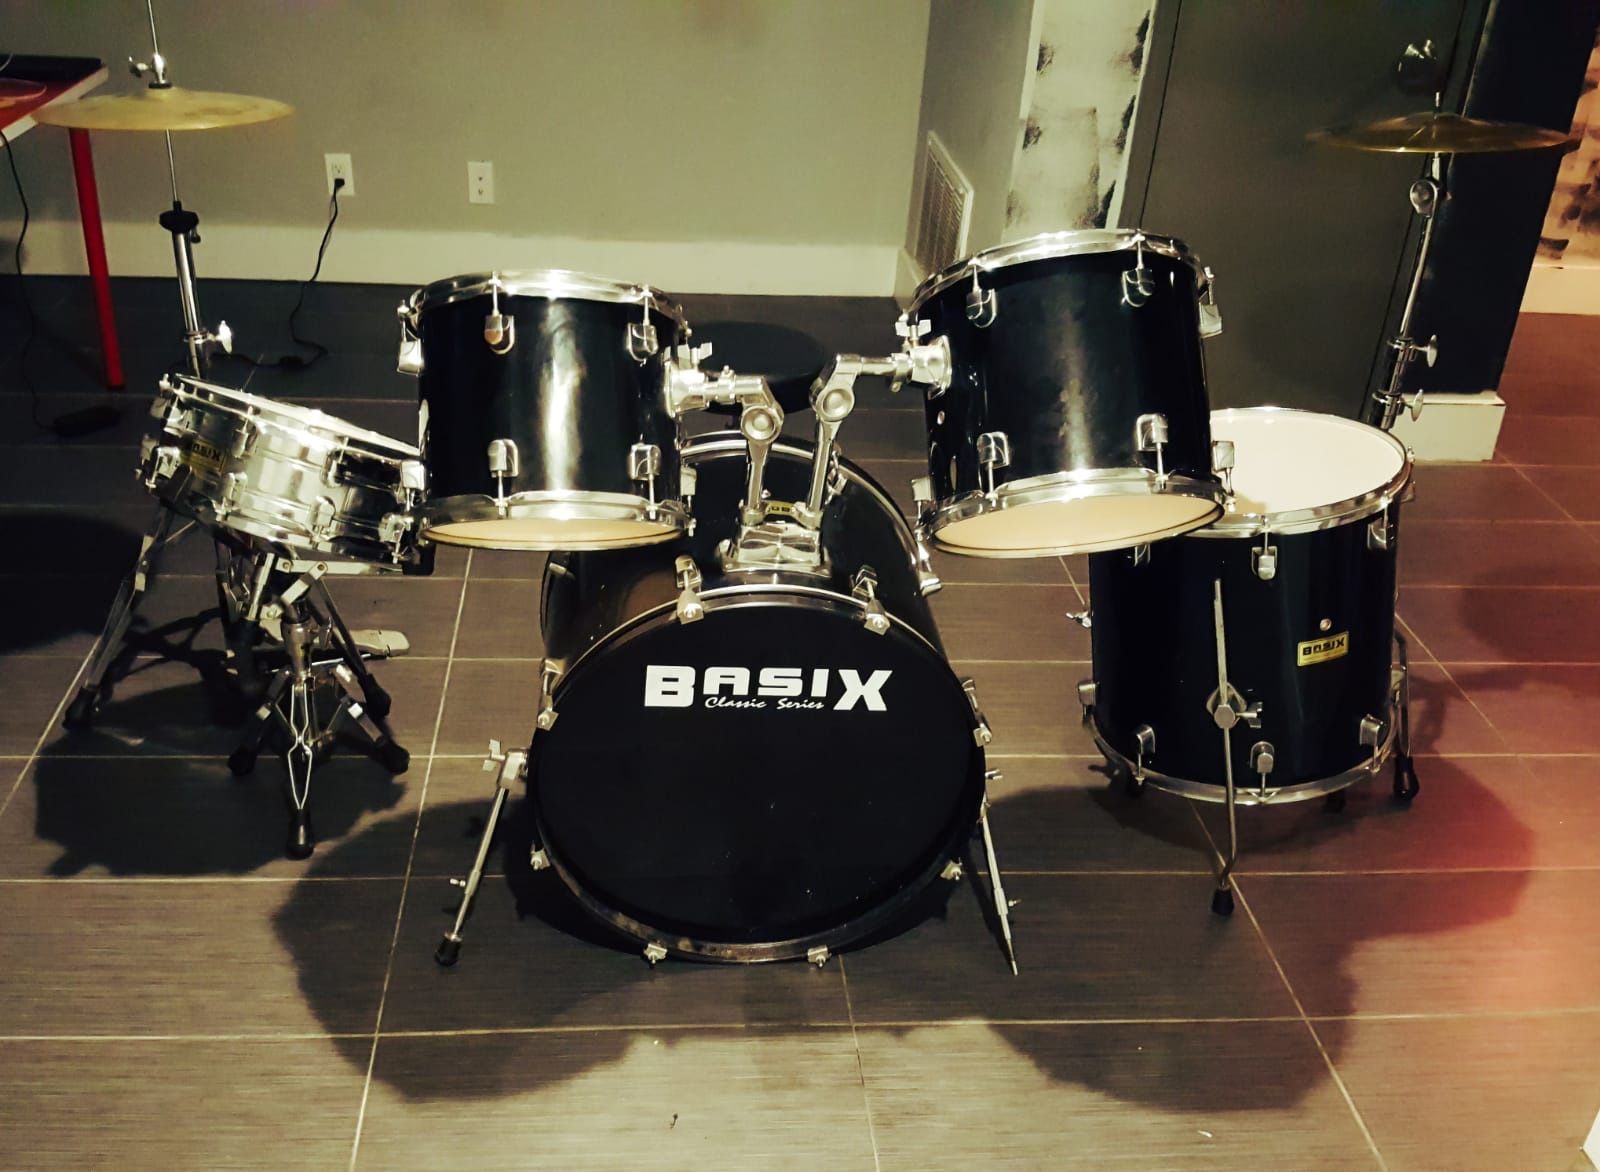 Basix company Heavy duty drum set almost brand new . Used slightly. With stands , sticks and everything..